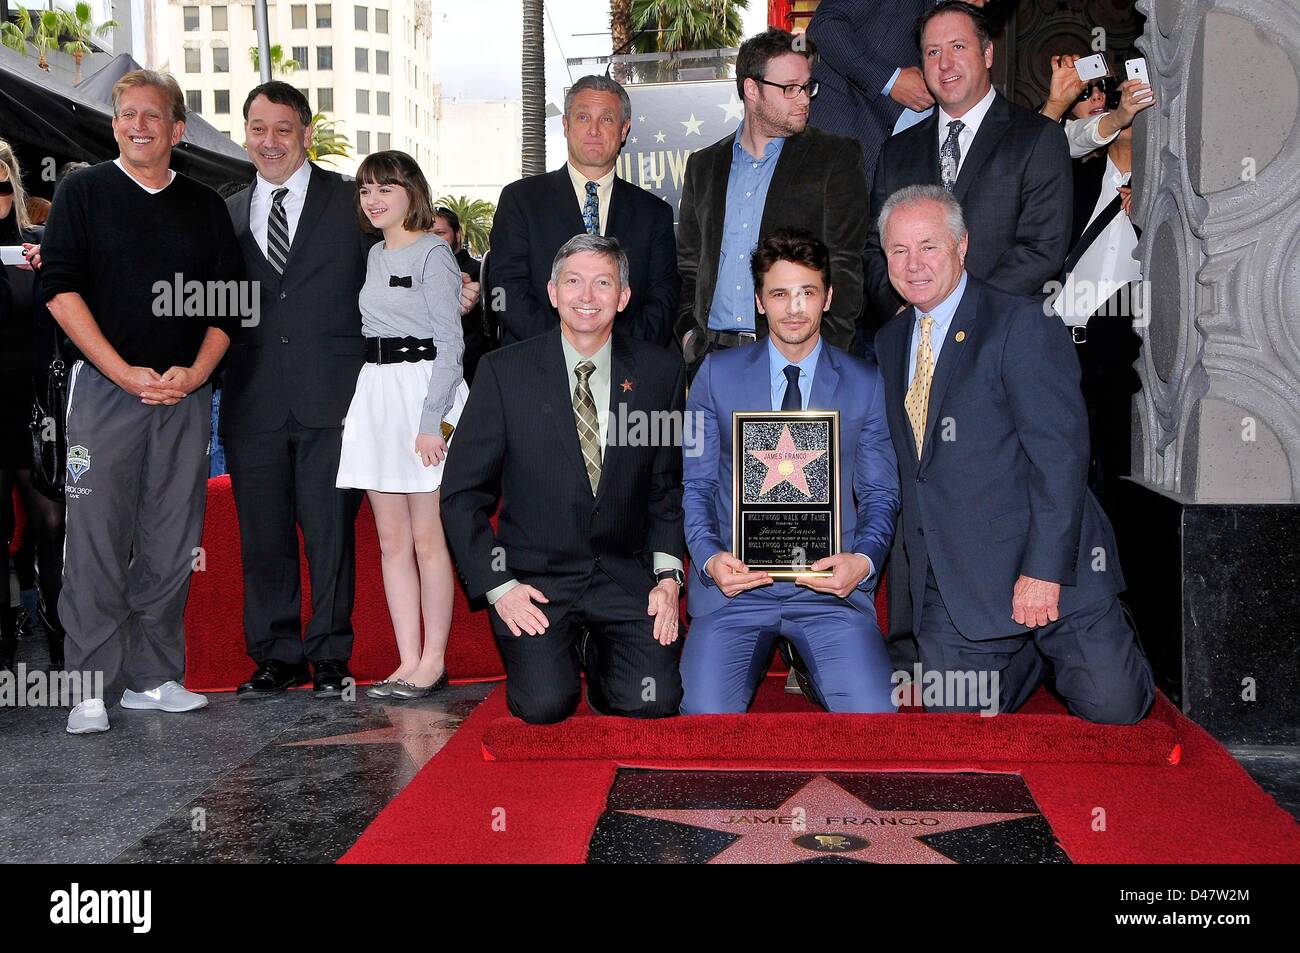 Joe Roth, Sam Raimi, Joey King, Leron Gubler, David Green, Seth Rogen, James Franco, Tom LaBonge, Christopher Barton at the induction ceremony for Star on the Hollywood Walk of Fame for James Franco, Hollywood Boulevard, Los Angeles, CA March 7, 2013. Photo By: Michael Germana/Everett Collection Stock Photo